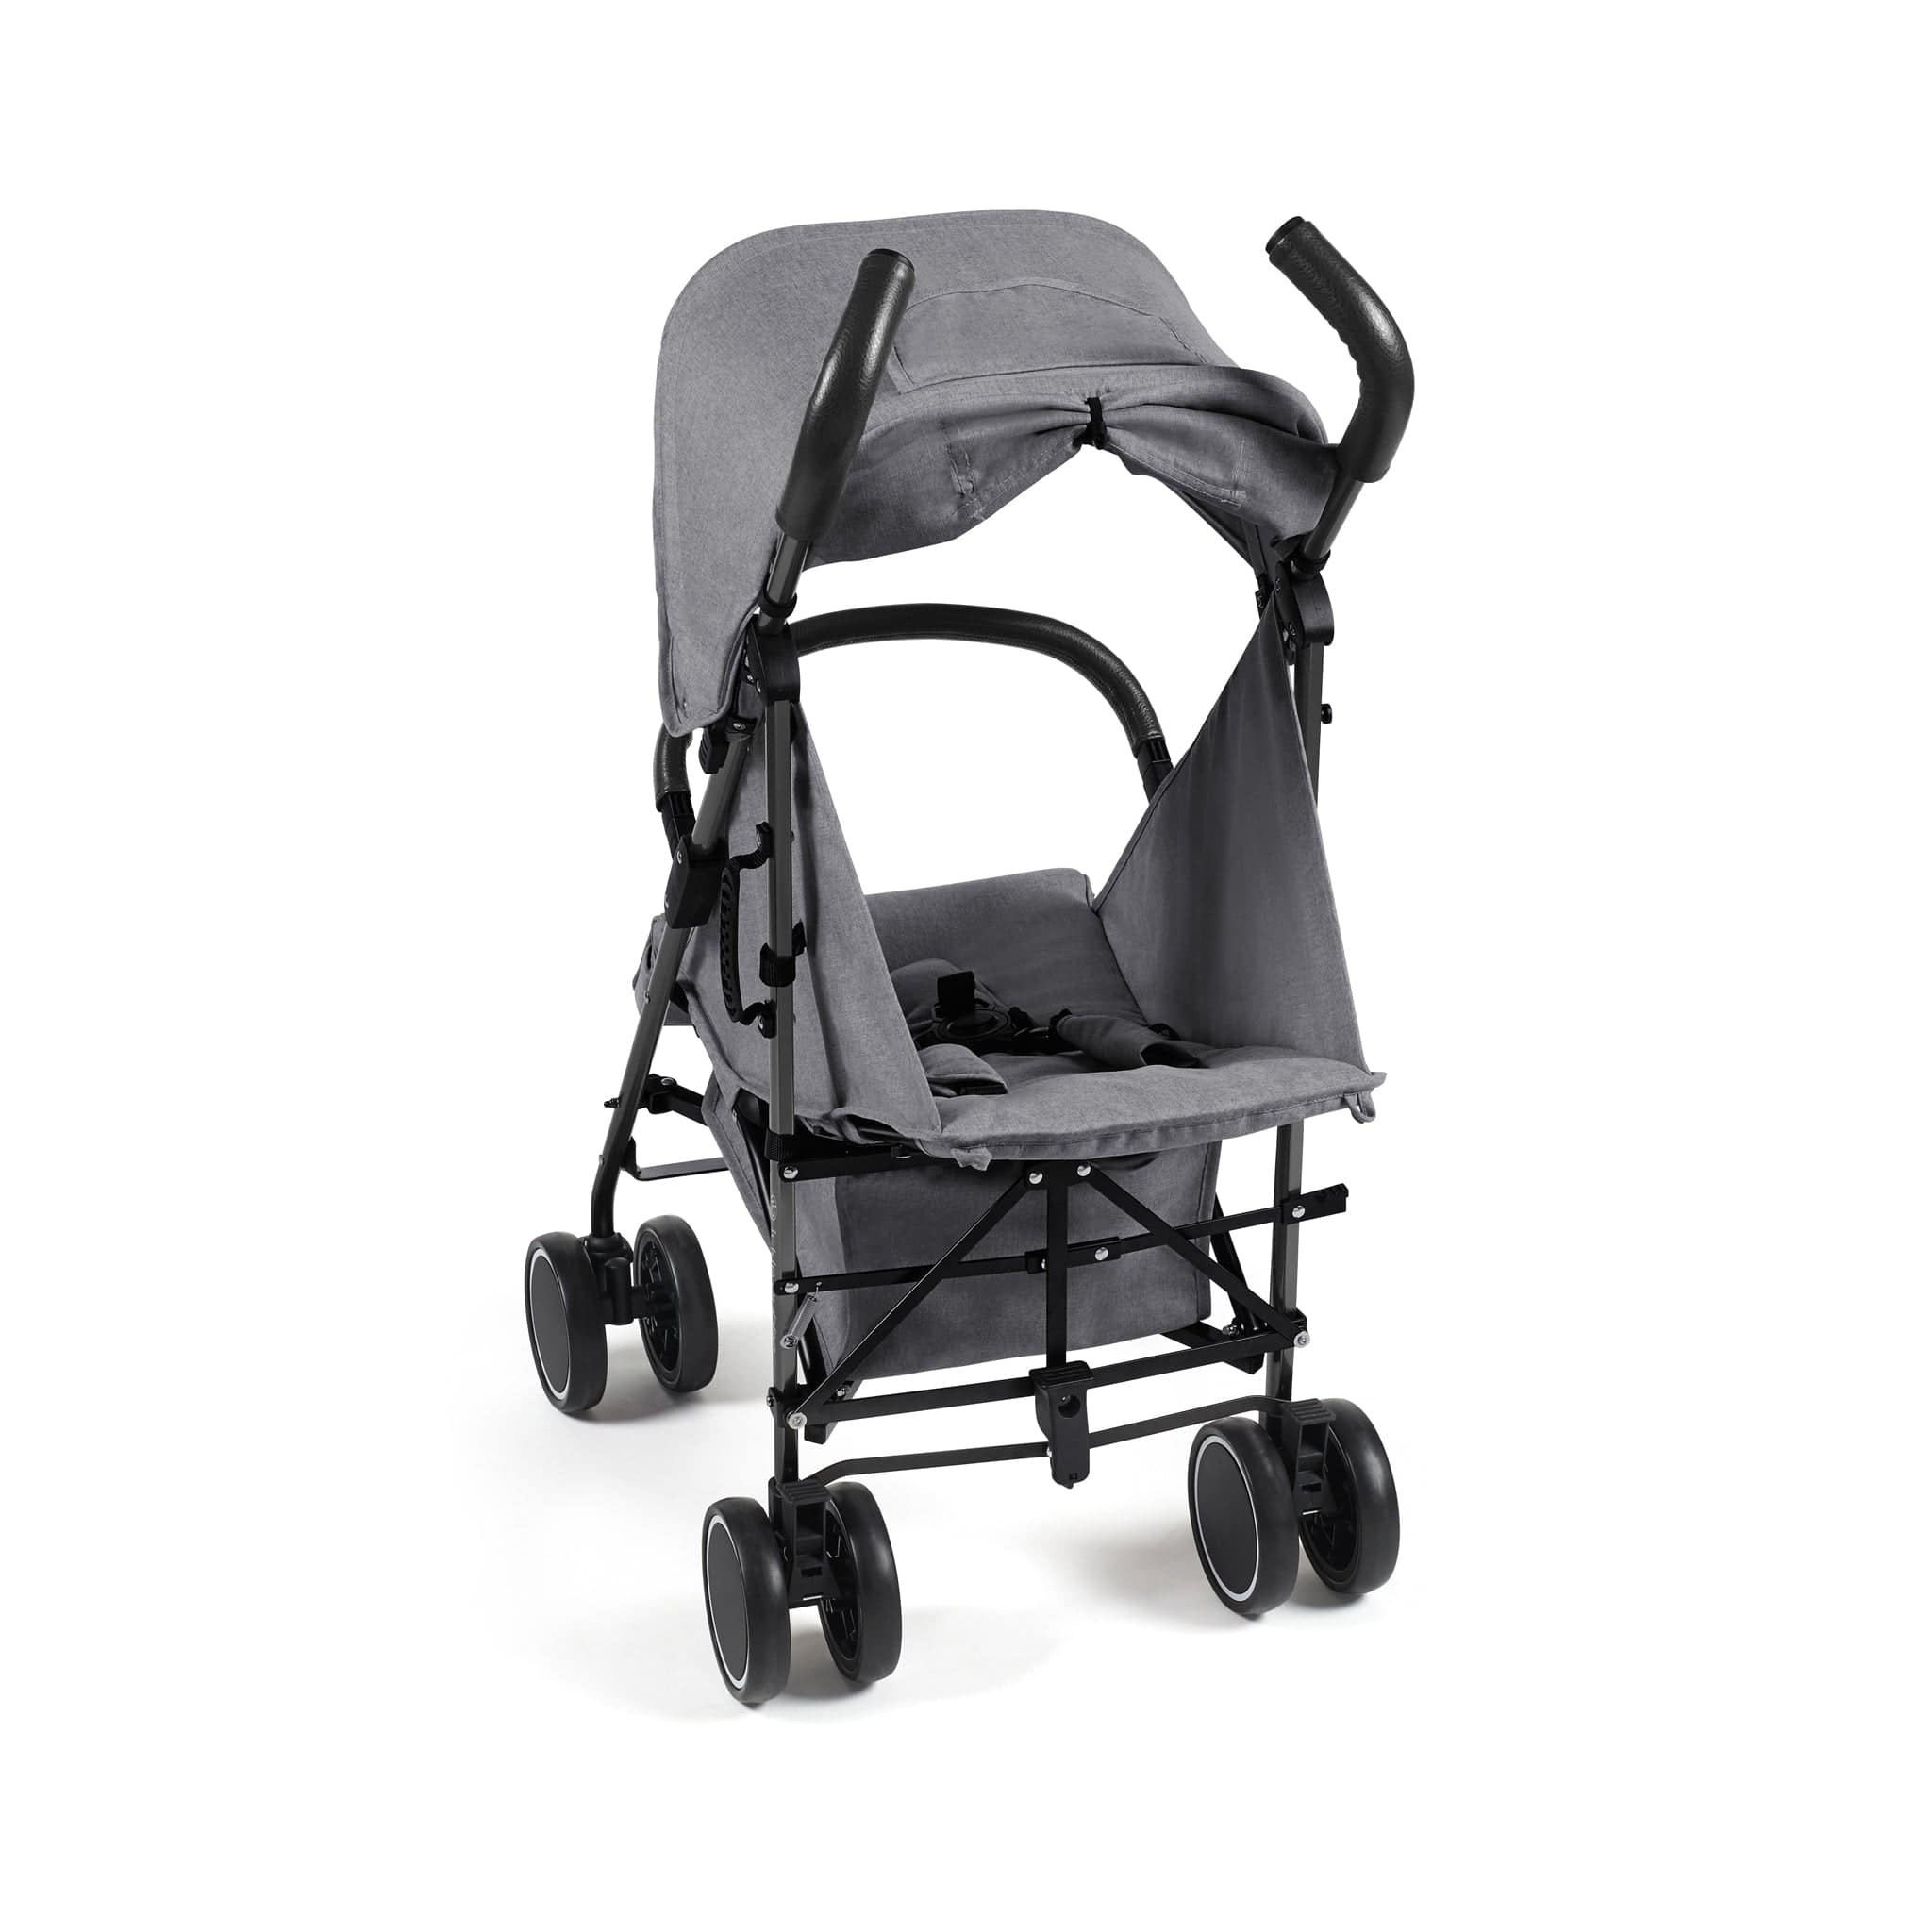 Ickle Bubba baby pushchairs Ickle Bubba Discovery Pushchair Graphite Grey/Matt Black 15-002-100-120